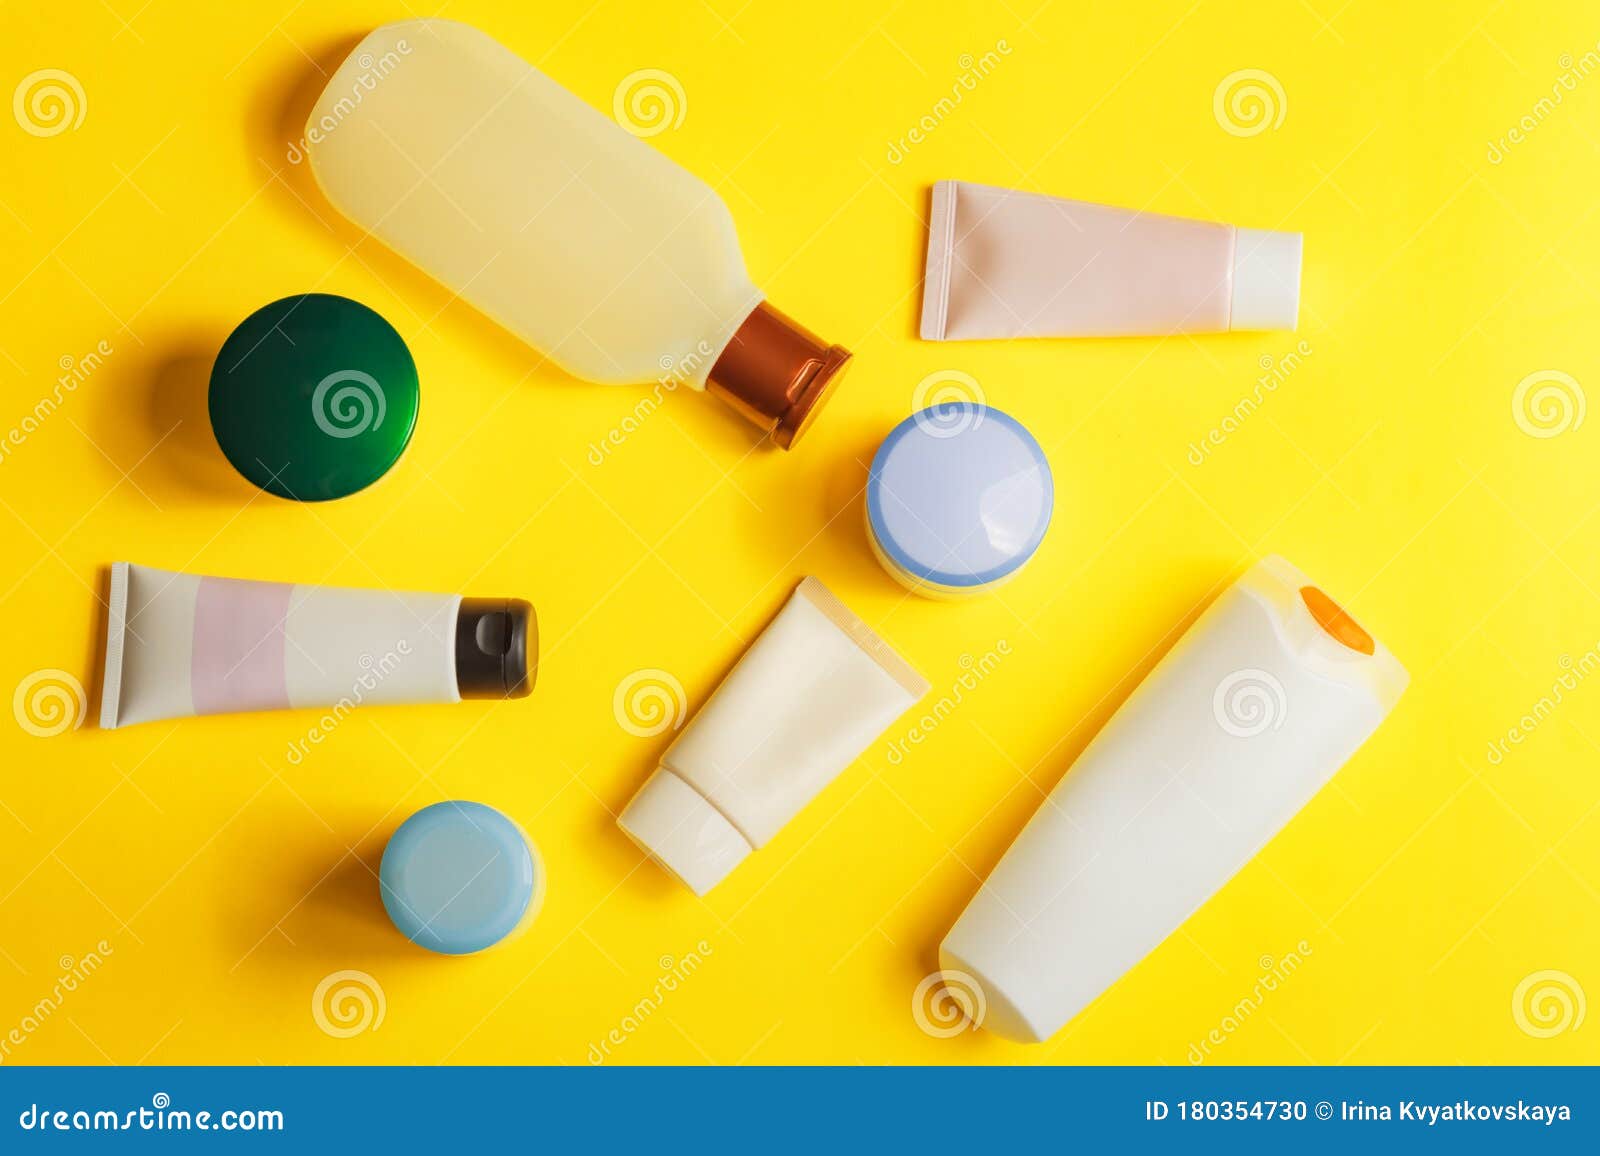 different colorful beauty toiletries on yellow background. men and women care products for hair and body. top view